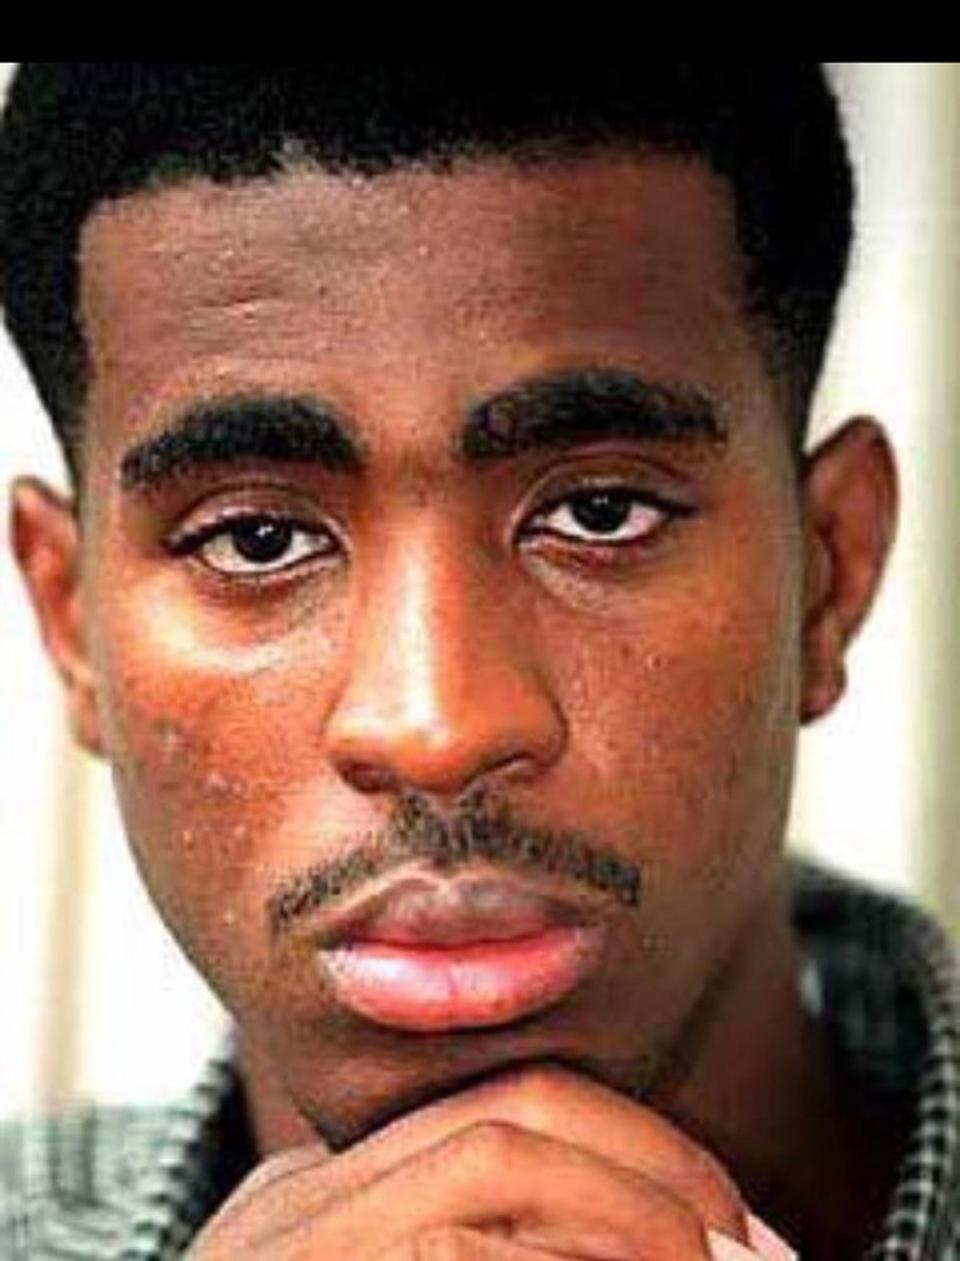 Orlando “Baby Lane” Anderson was a suspected shooter in the death of Tupac.